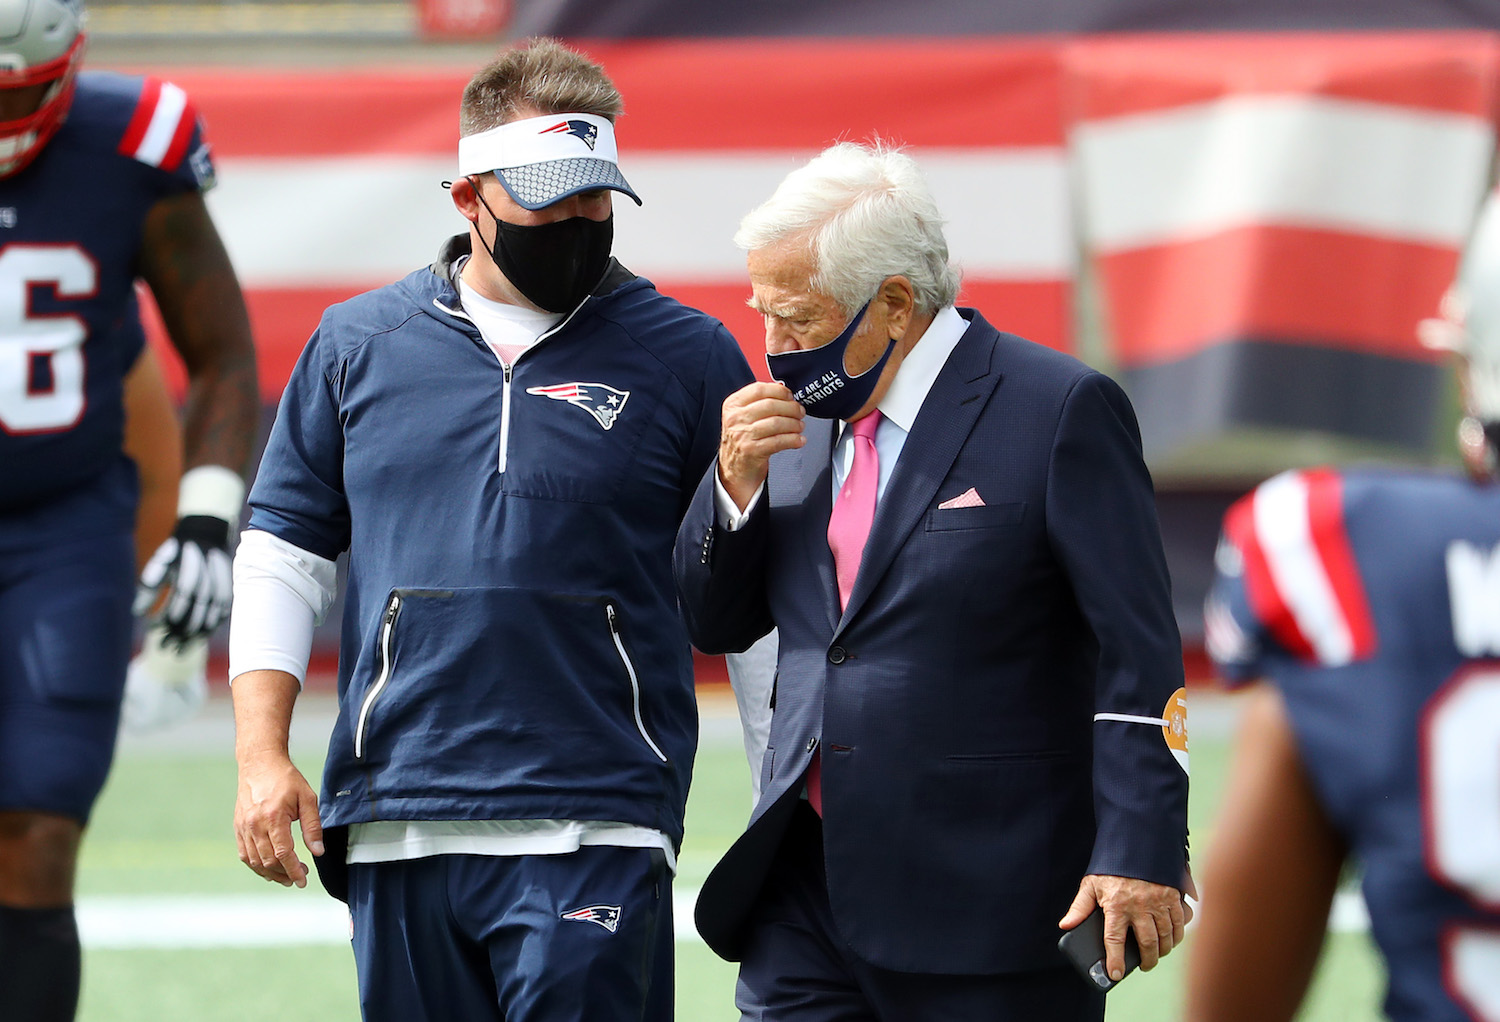 FOXBOROUGH, MASSACHUSETTS - SEPTEMBER 27: New England Patriots offensive coordinator Josh McDaniels walks with owner Robert Kraft before the game against the Las Vegas Raiders at Gillette Stadium on September 27, 2020 in Foxborough, Massachusetts. (Photo by Maddie Meyer/Getty Images)